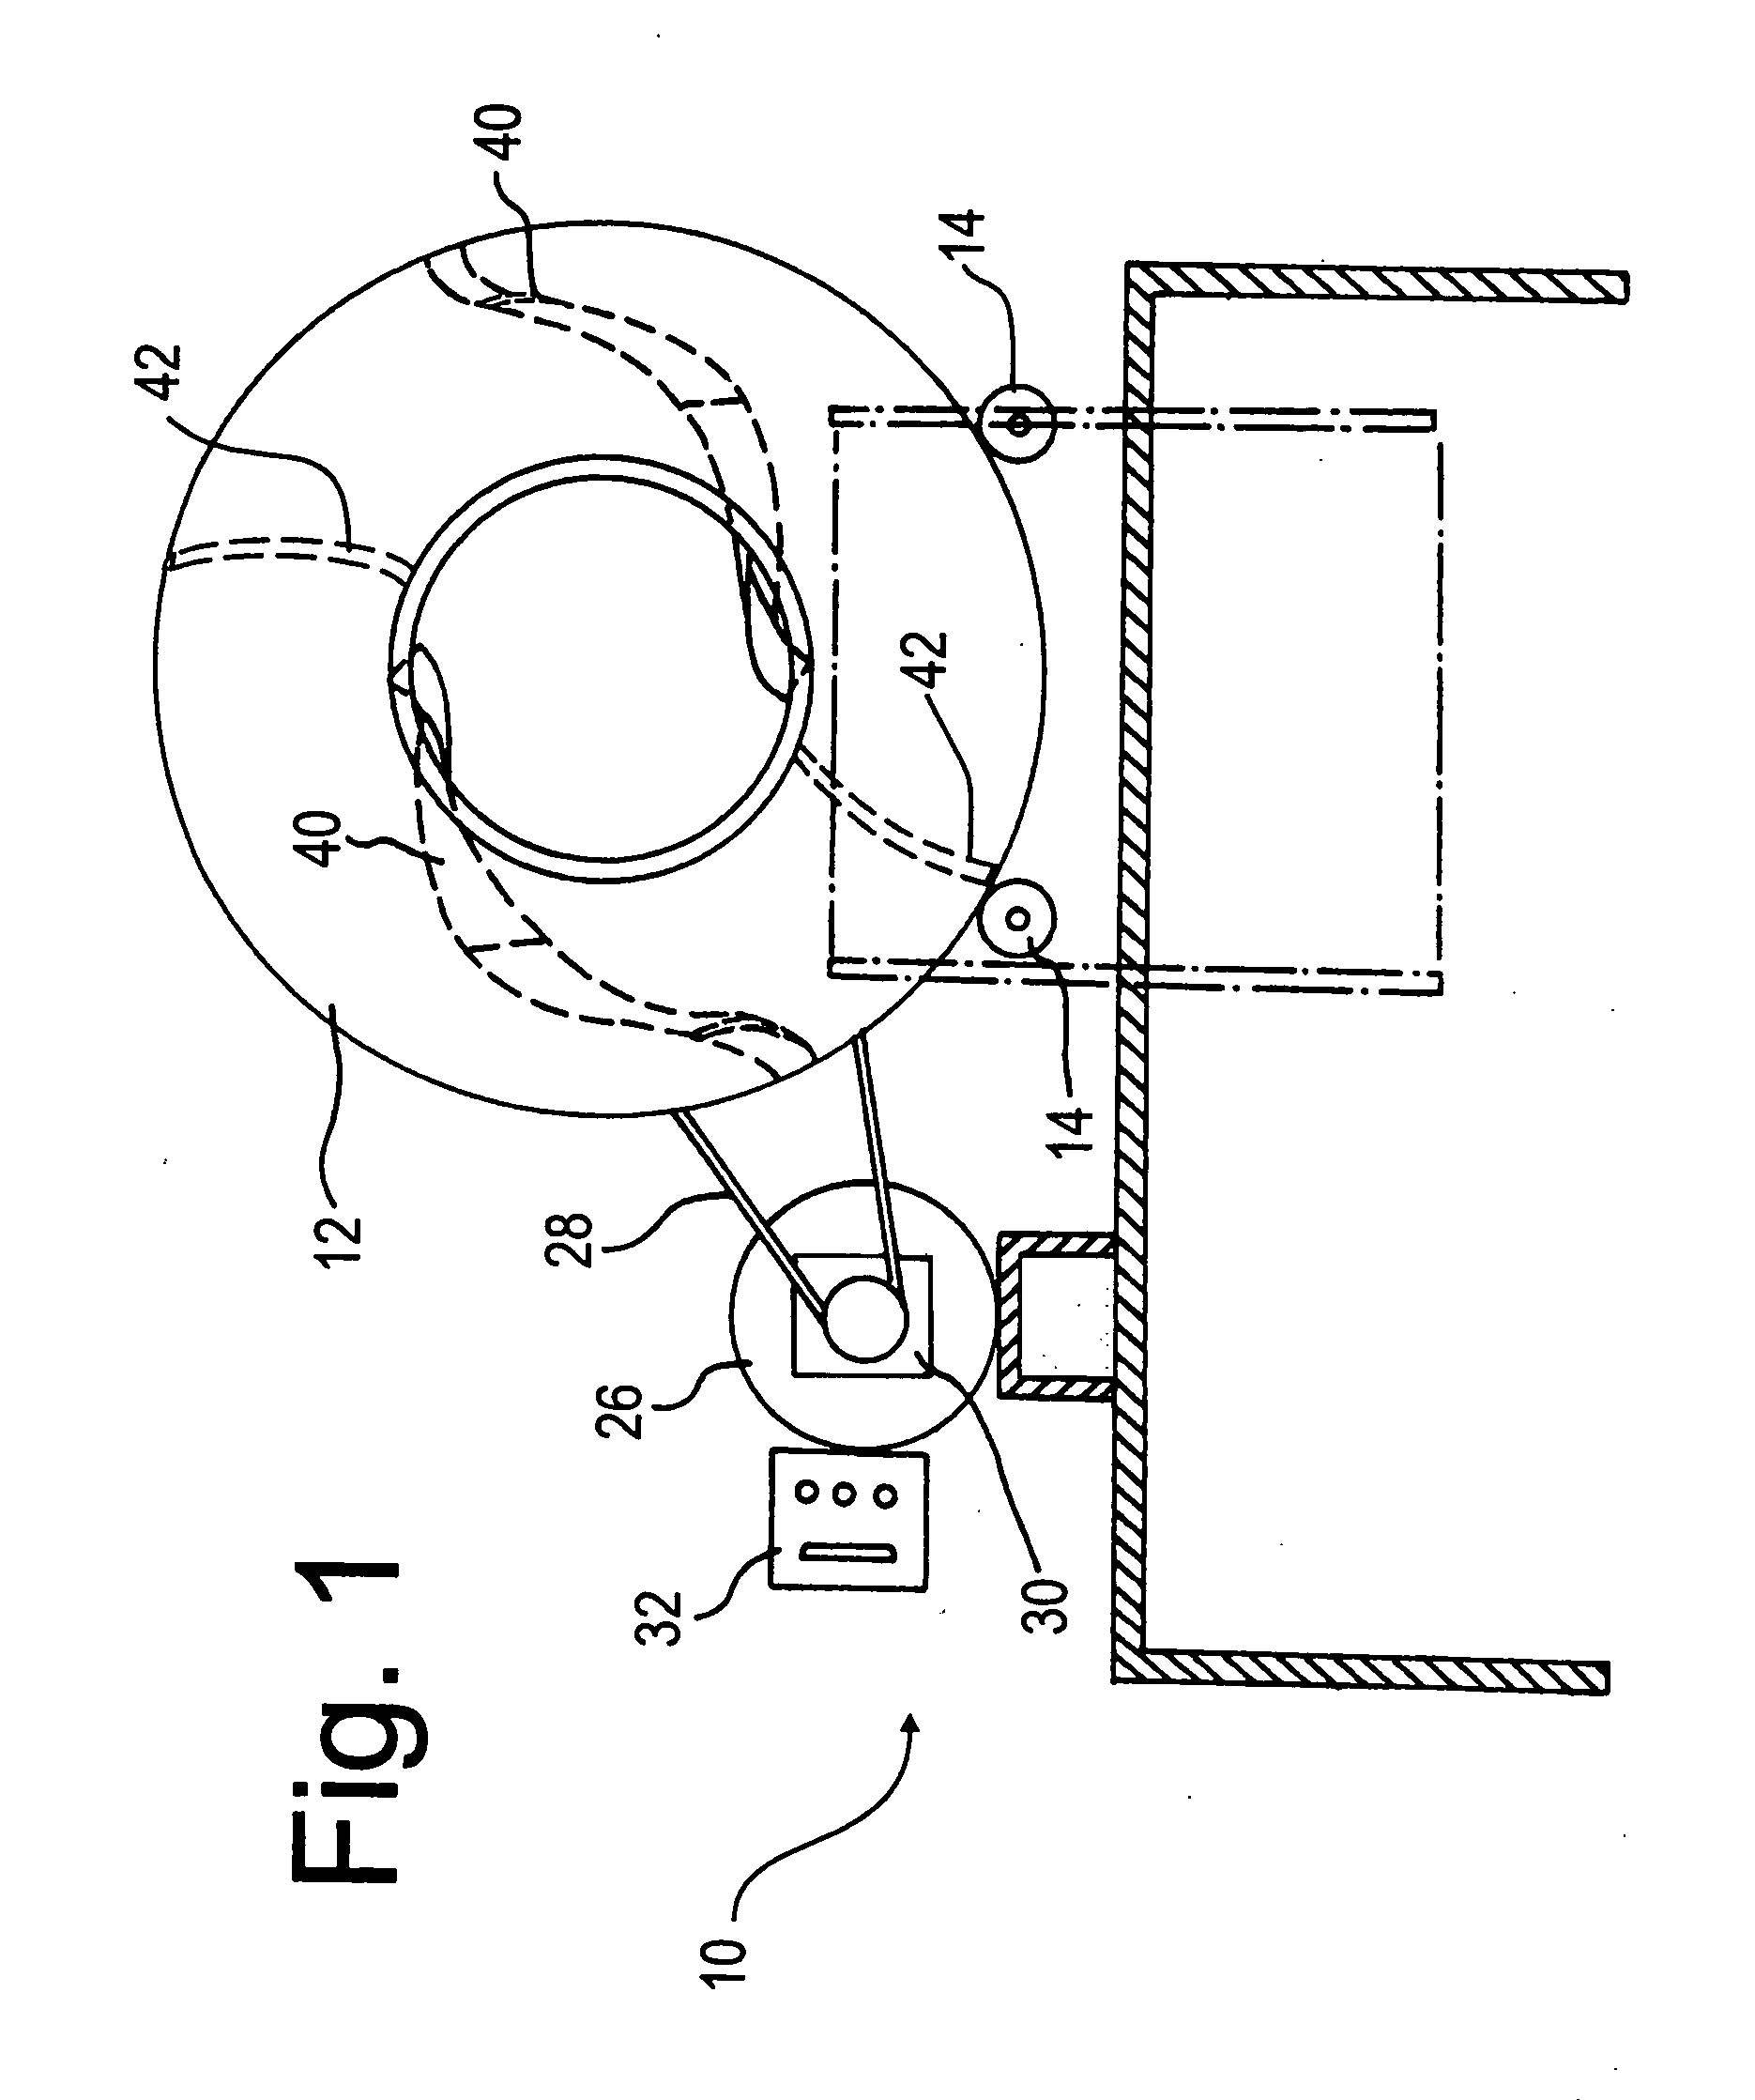 Rotary drum for tablet coating with reverse-direction unloading